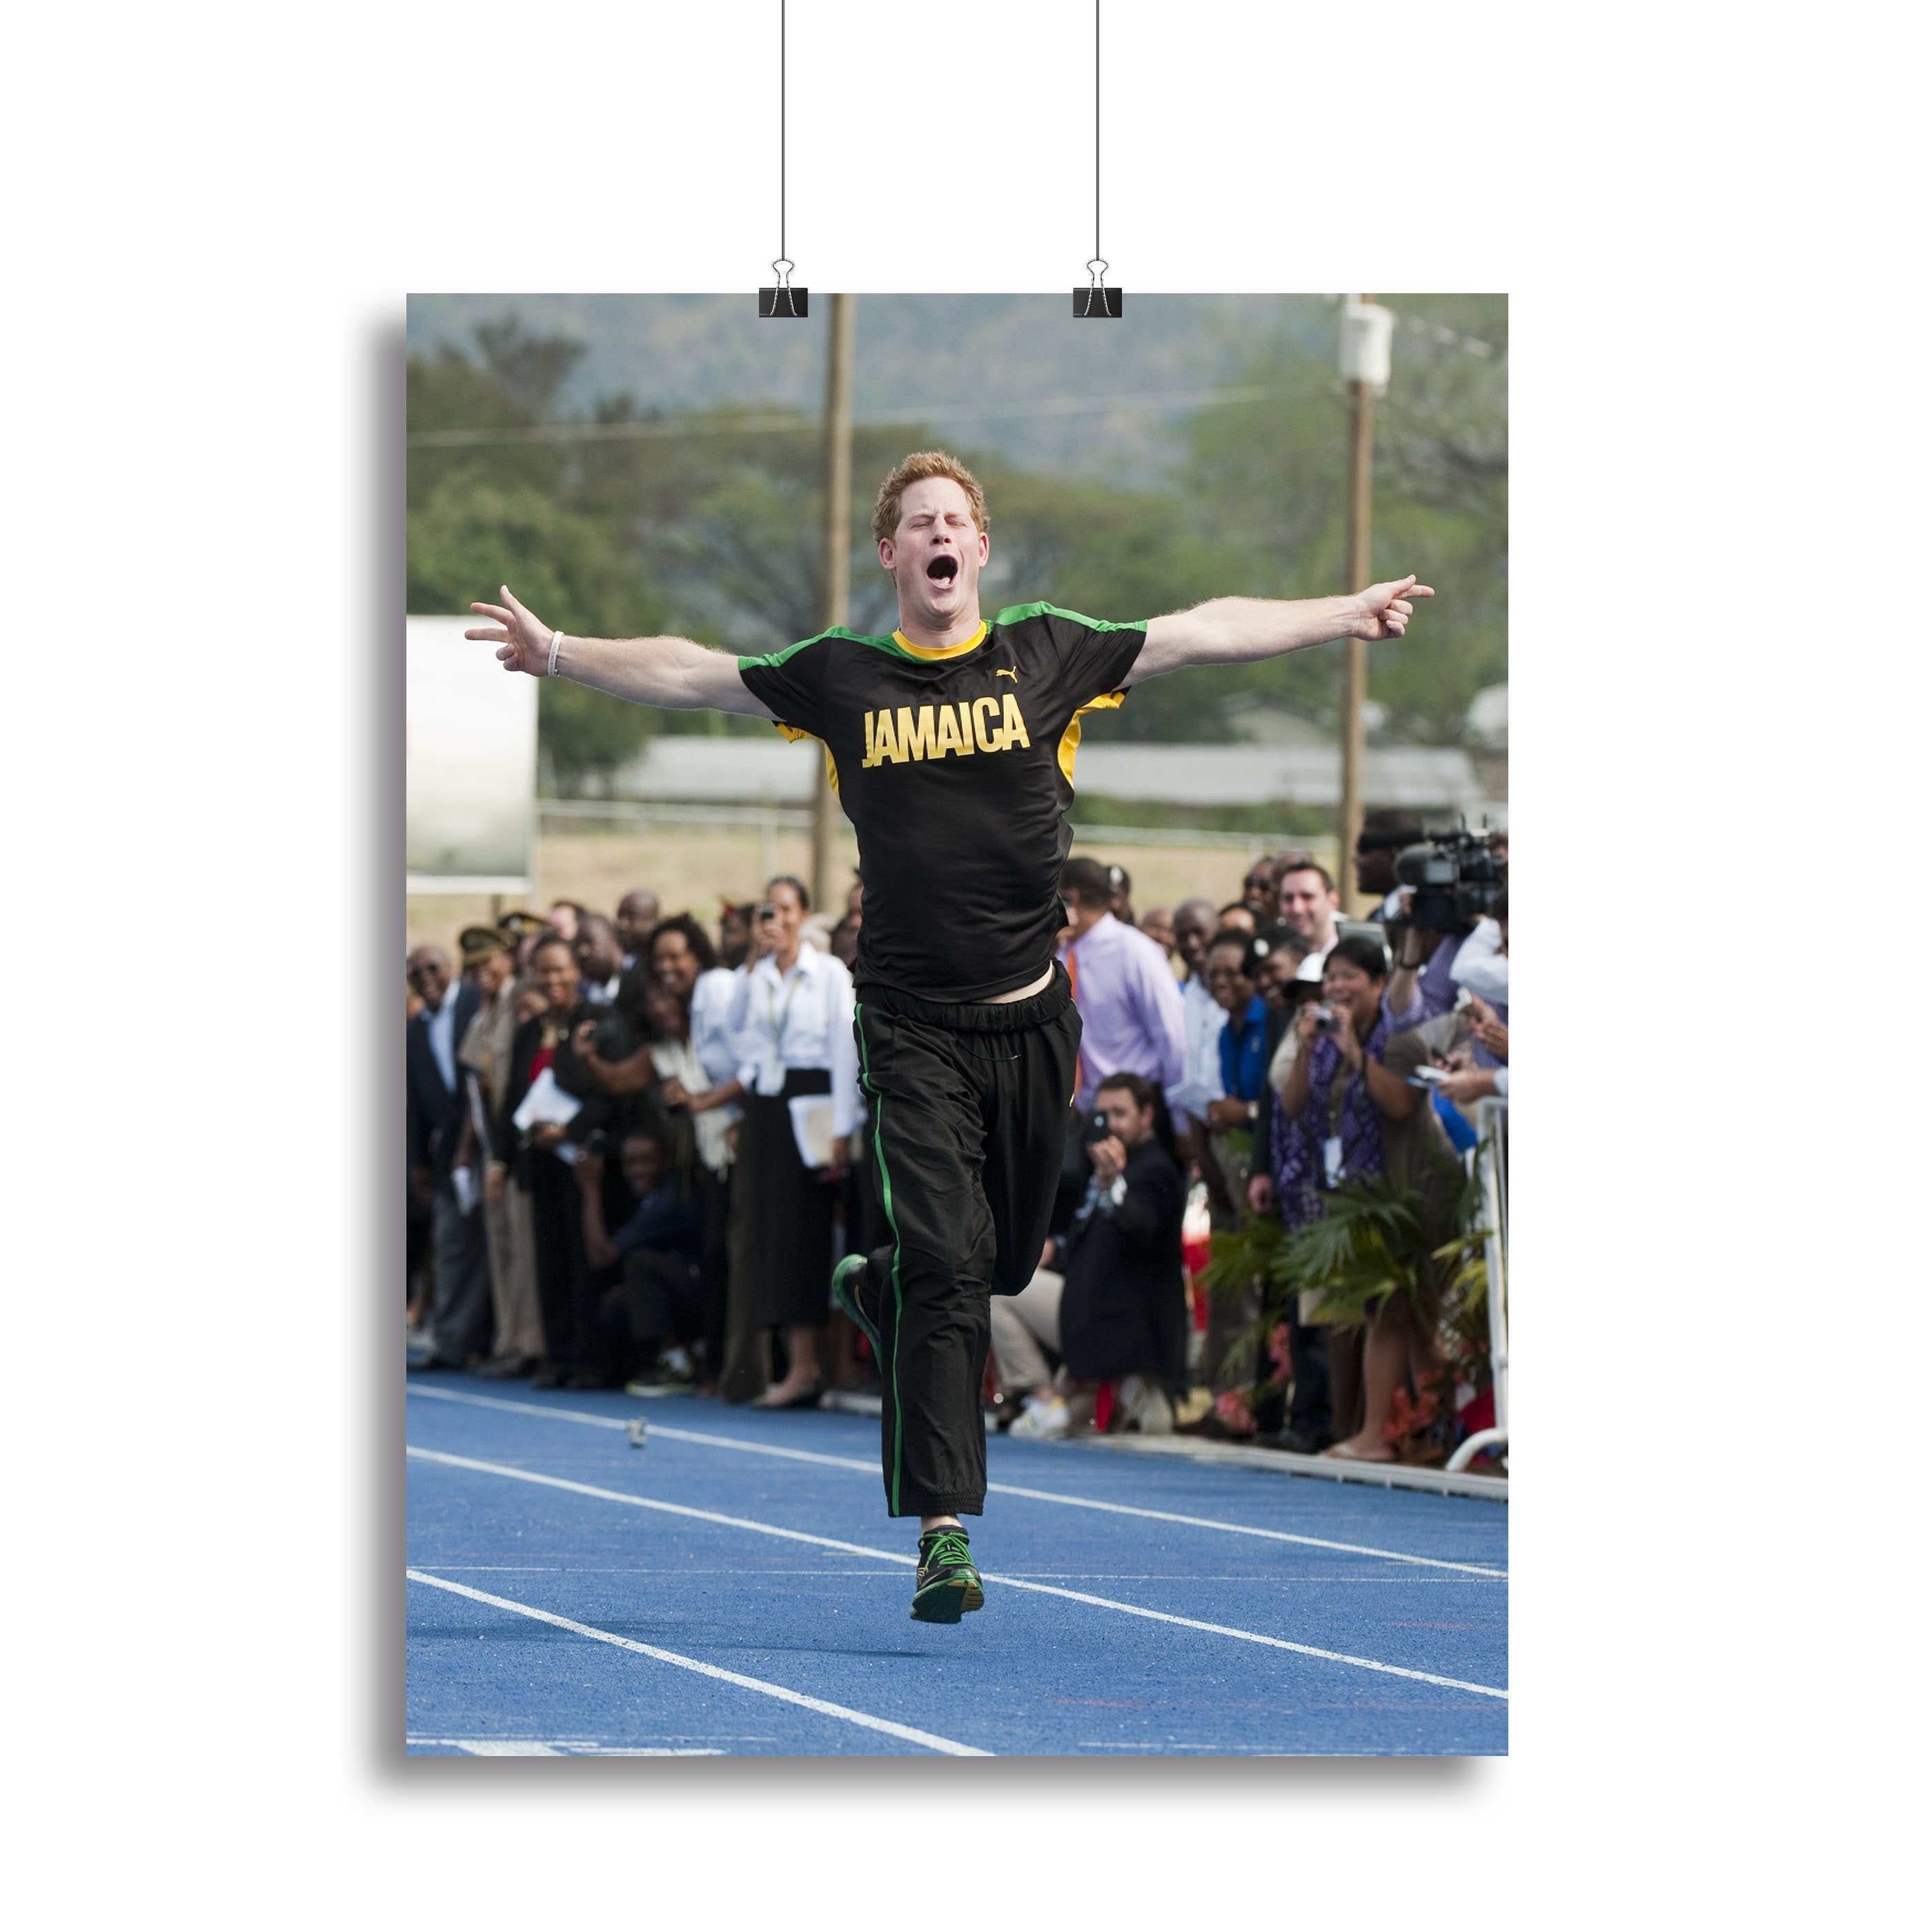 Prince Harry racing in Kingston Jamaica Canvas Print or Poster